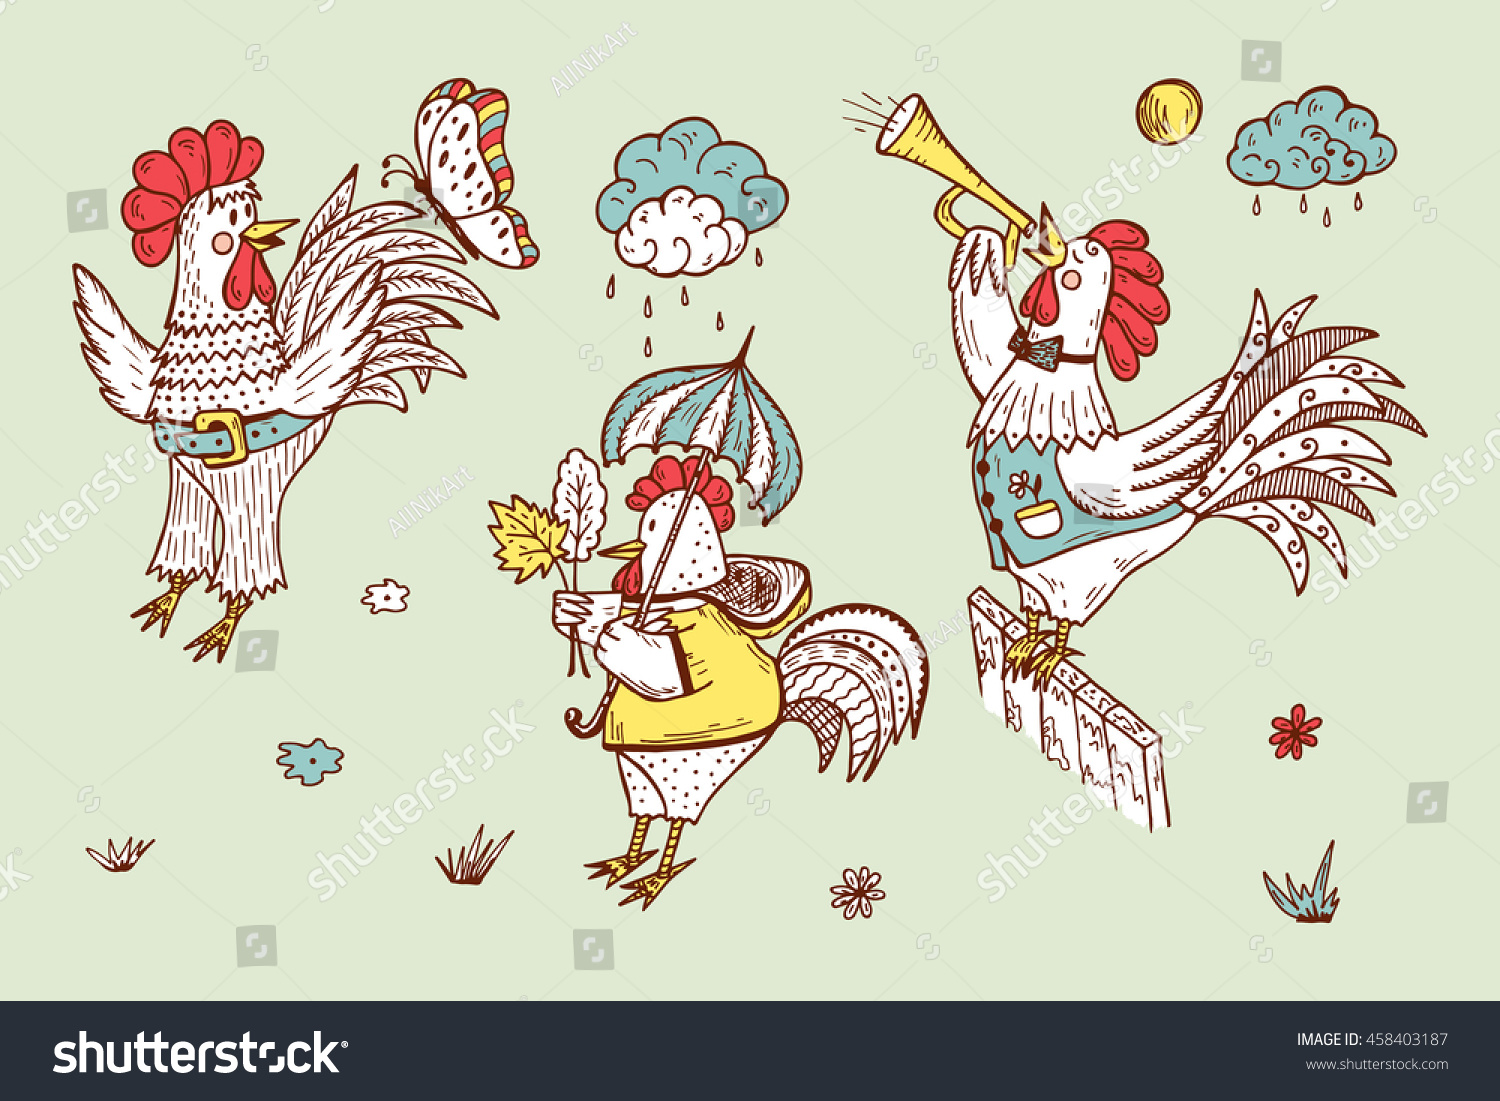 SVG of Different Funny Cartoon Roosters Vector Set. Hand Drawn Doodle Cocks. Rooster symbol of Chinese New Year svg